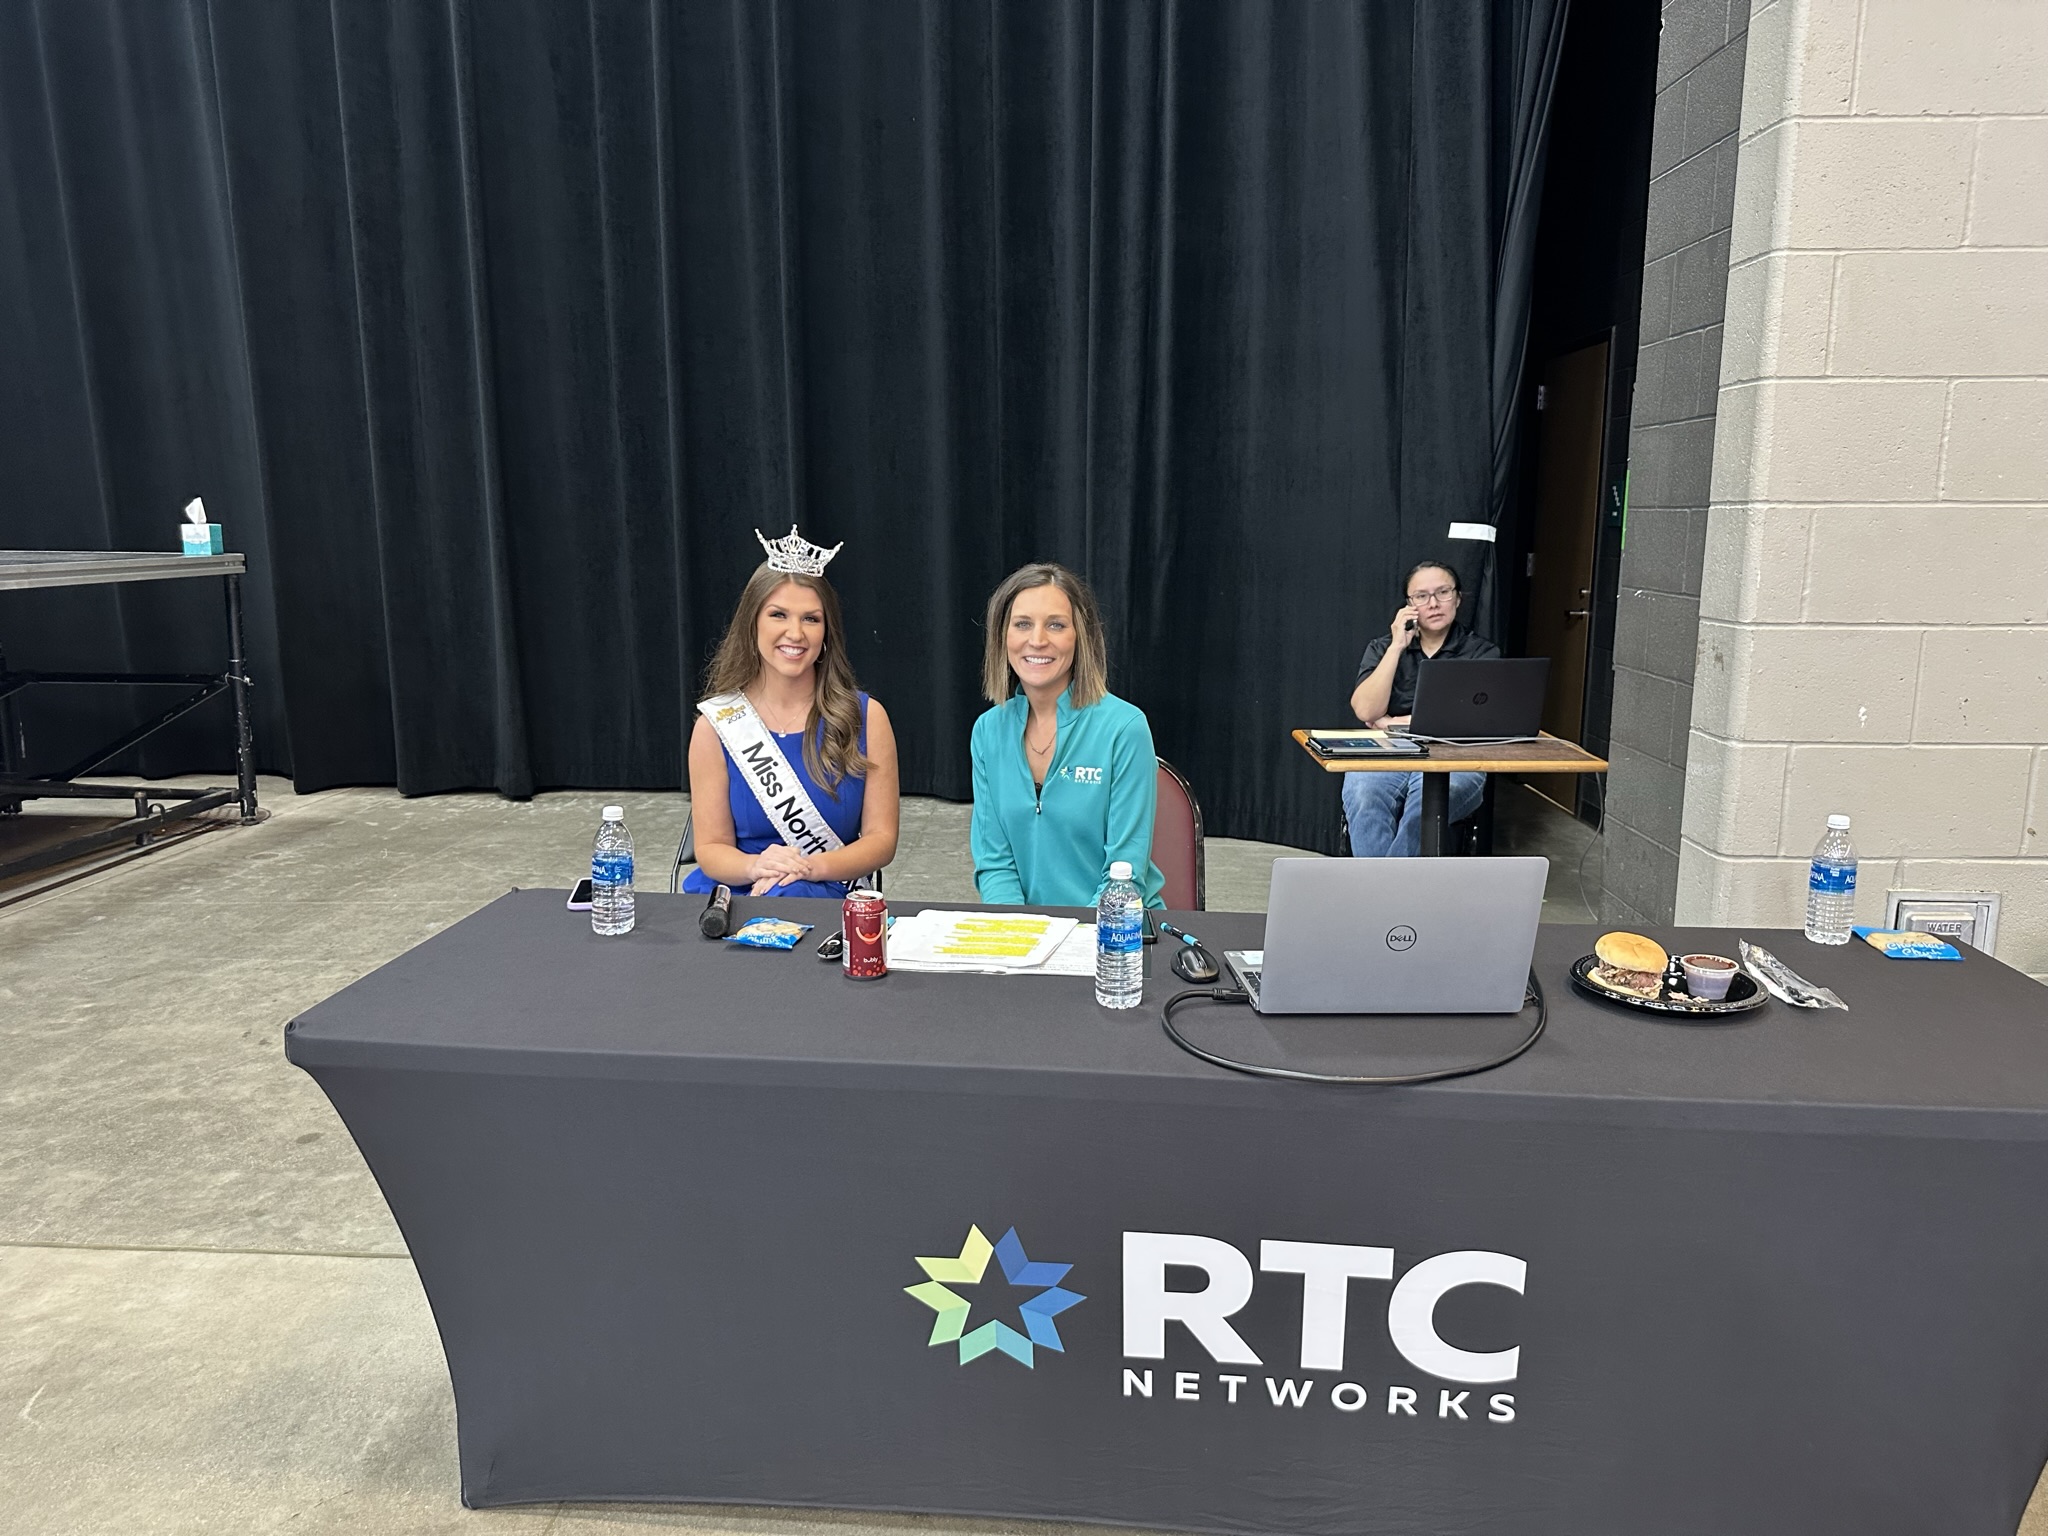 RTC Networks 72nd Annual Meeting